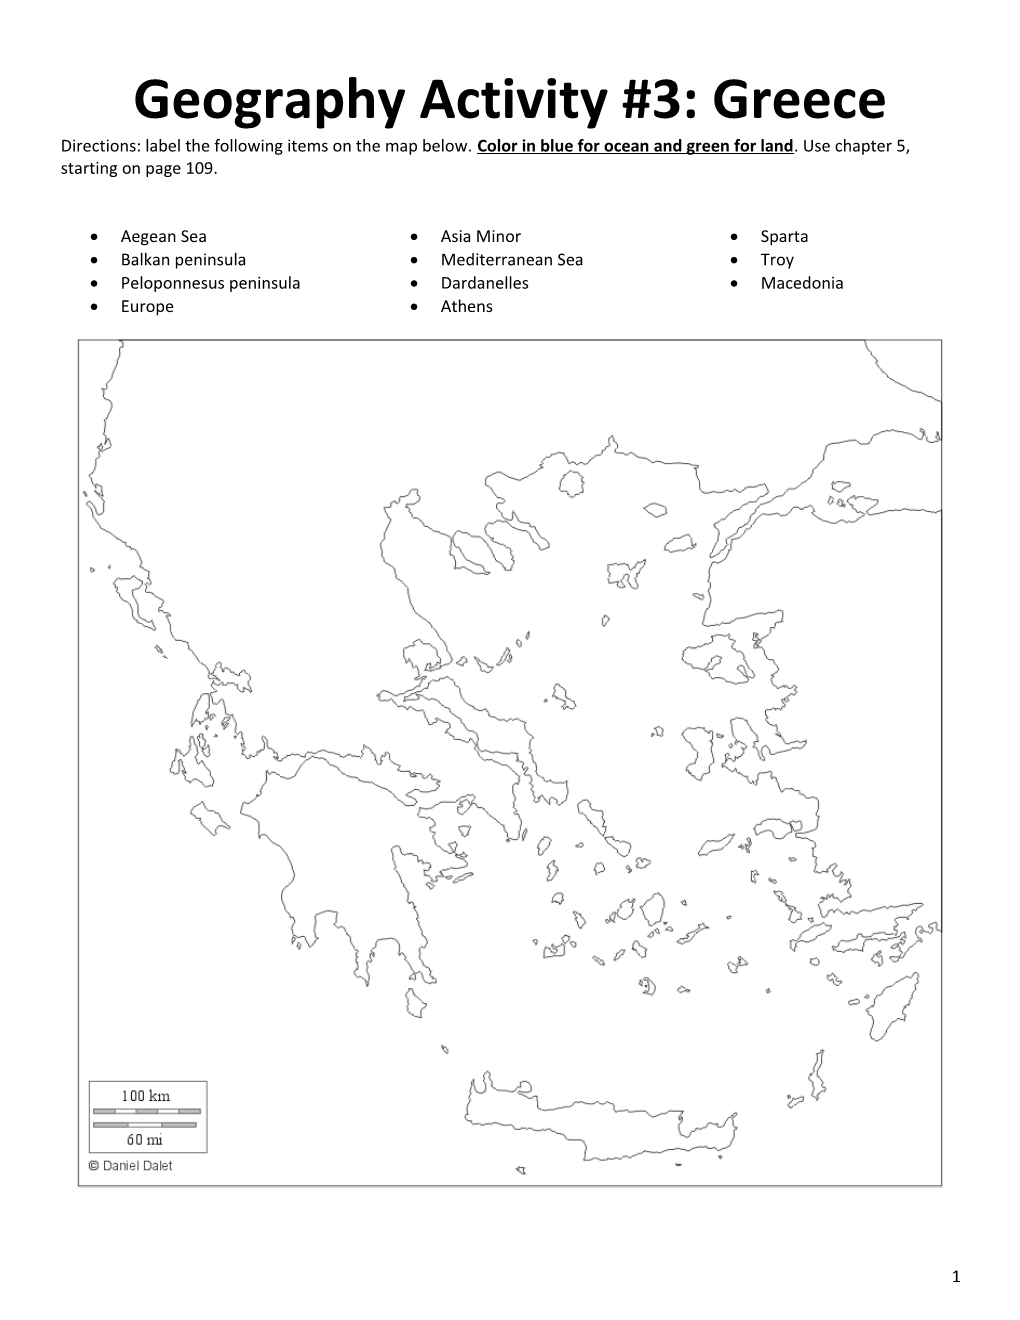 Geography Activity #3: Greece